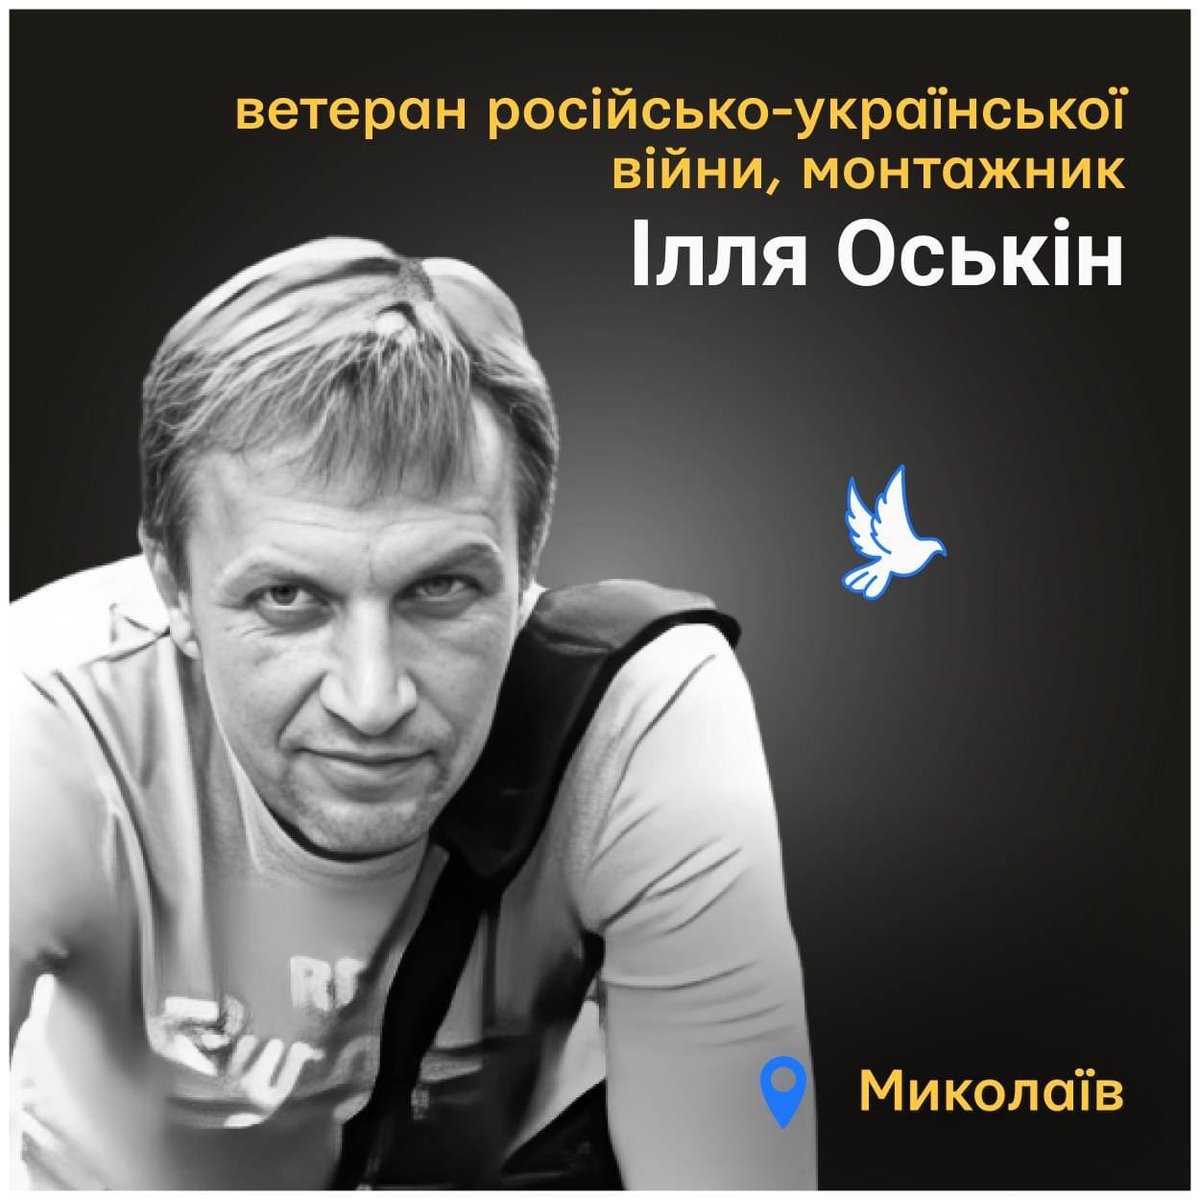 Ilya Oskin died on April 11, 2024 in Mykolaiv. He worked as a fitter at an industrial plant that was hit by a Russian missile.

Ilya was 52 years old. Born in Kherson, later the family moved to Mykolaiv. Ilya had his own business - he performed high-rise construction work.